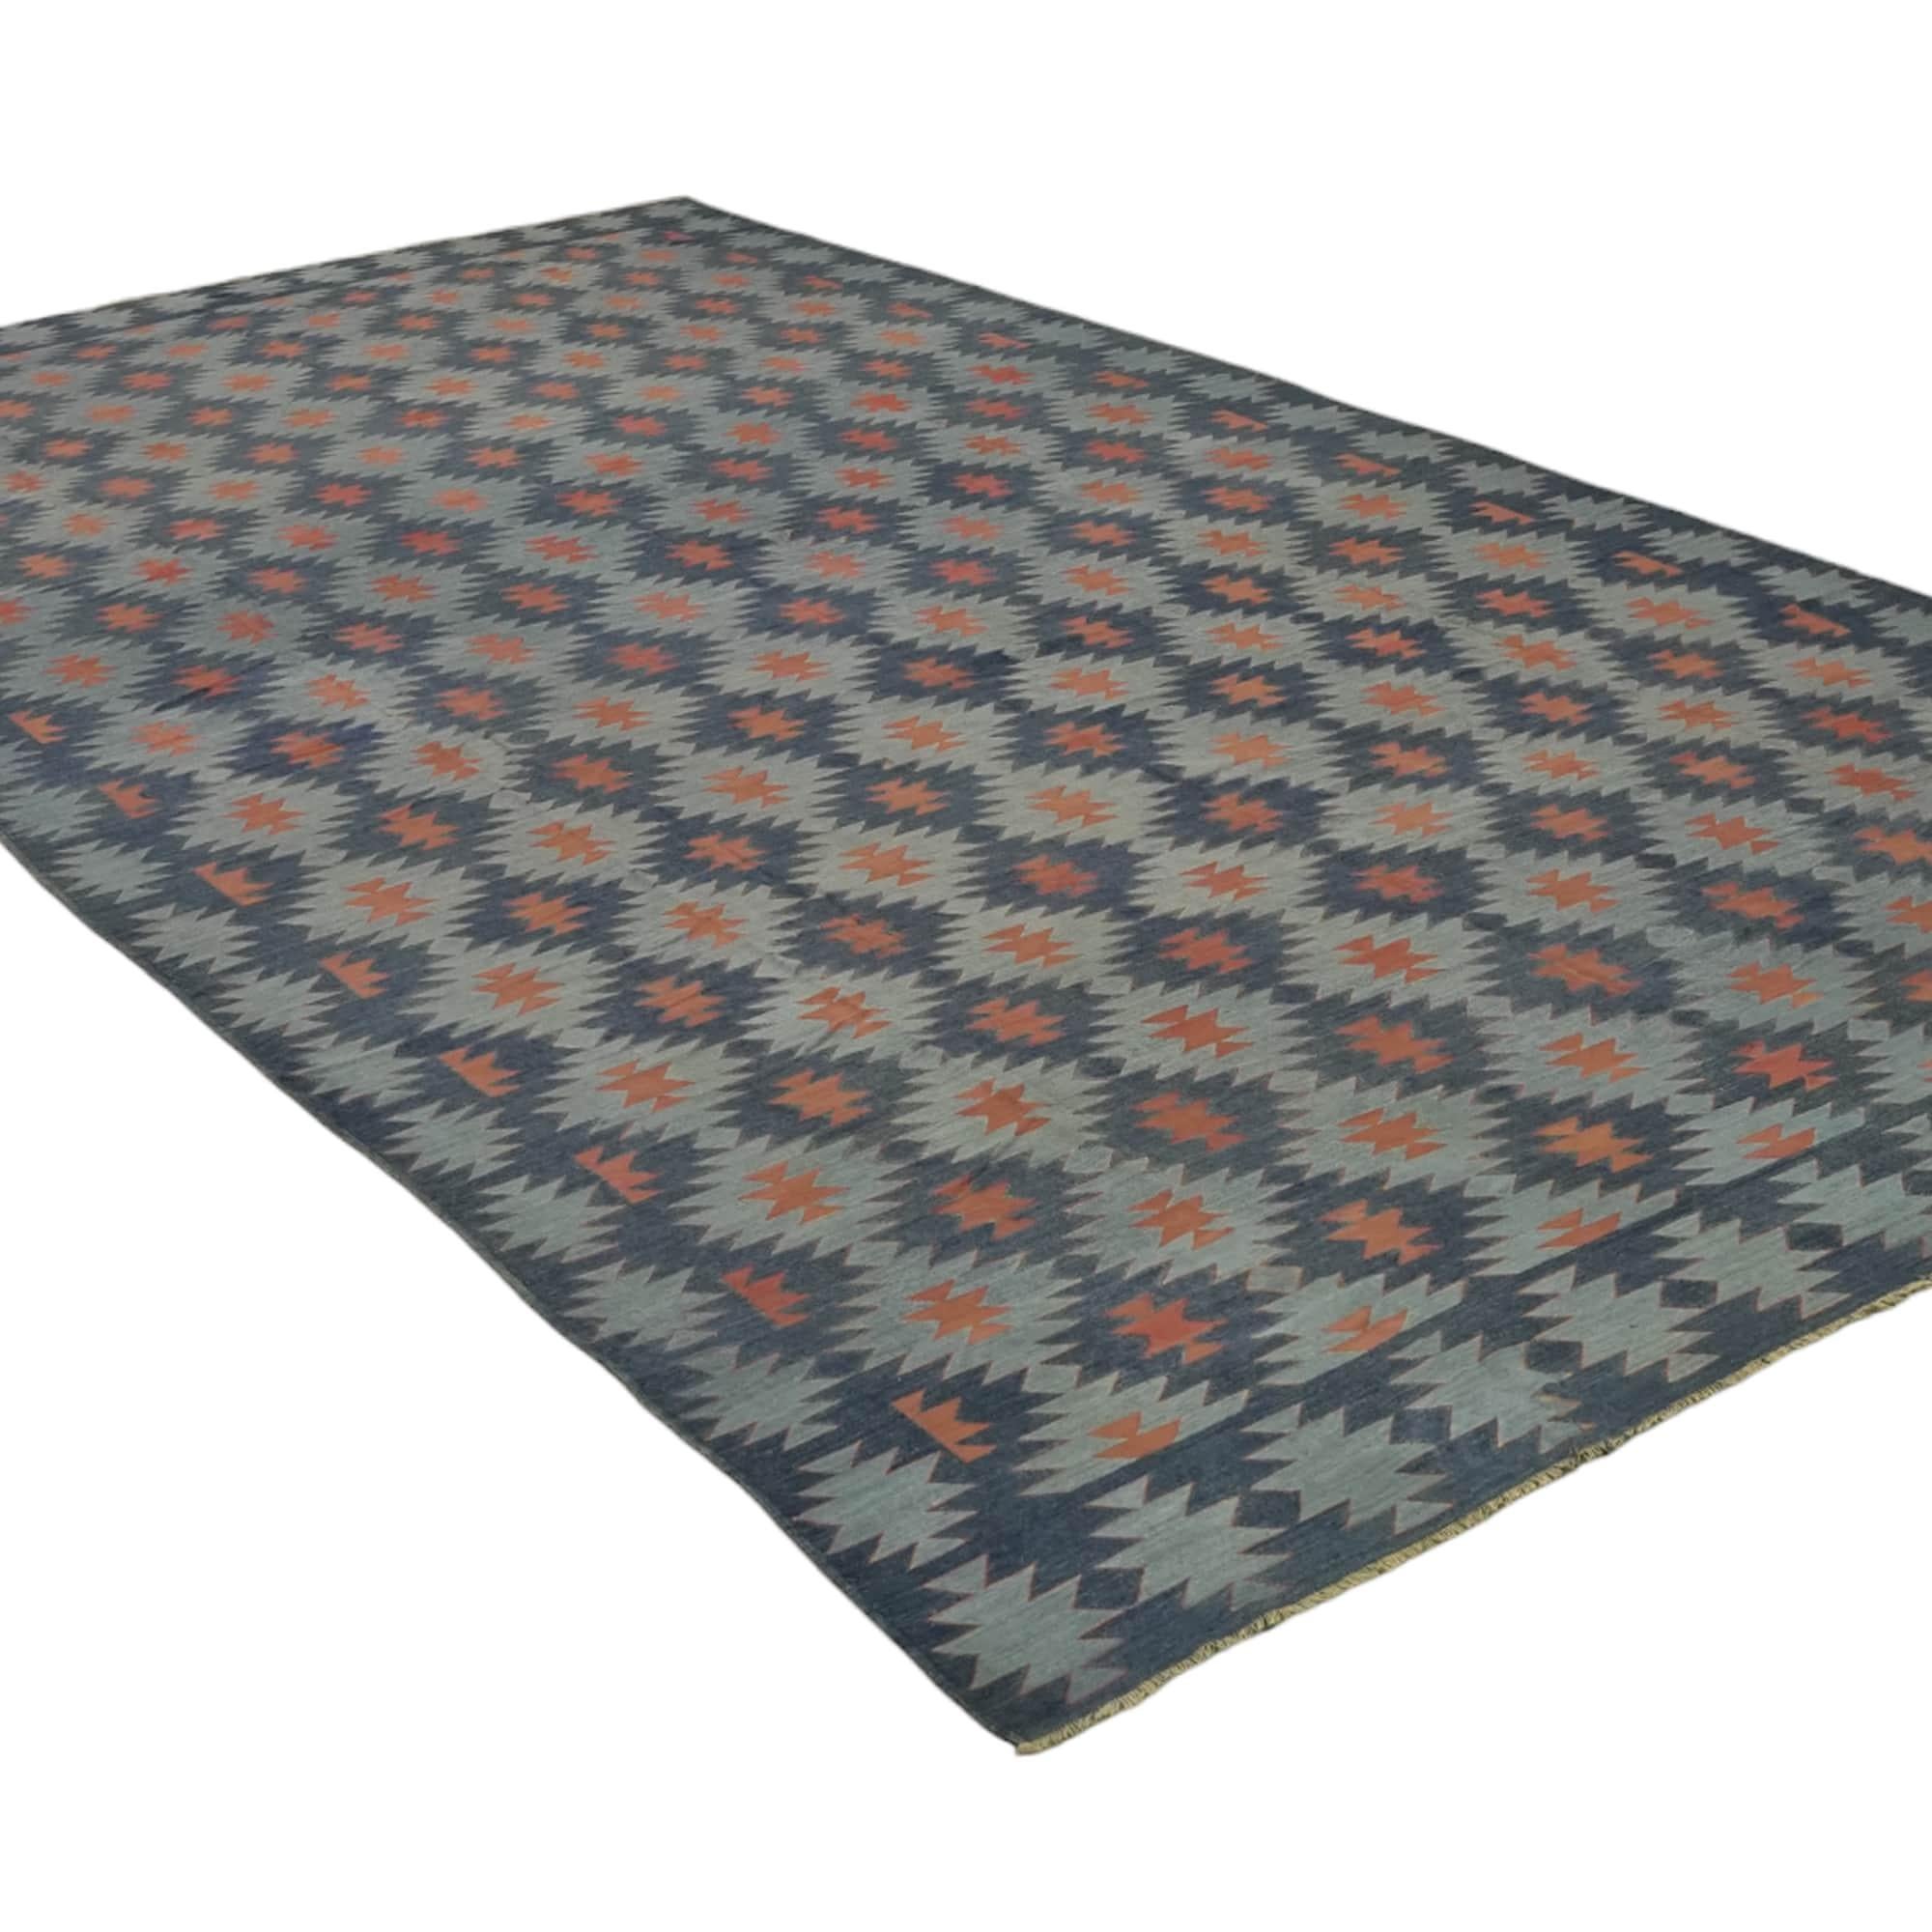 This vintage 10x20 Dhurrie flat weave runner is an exciting new entry in Rug & Kilim’s esteemed collection. Handwoven in wool, it originates from India circa 1950-1960. 

On the Design: 

From Rug & Kilim’s exclusive collection of vintage